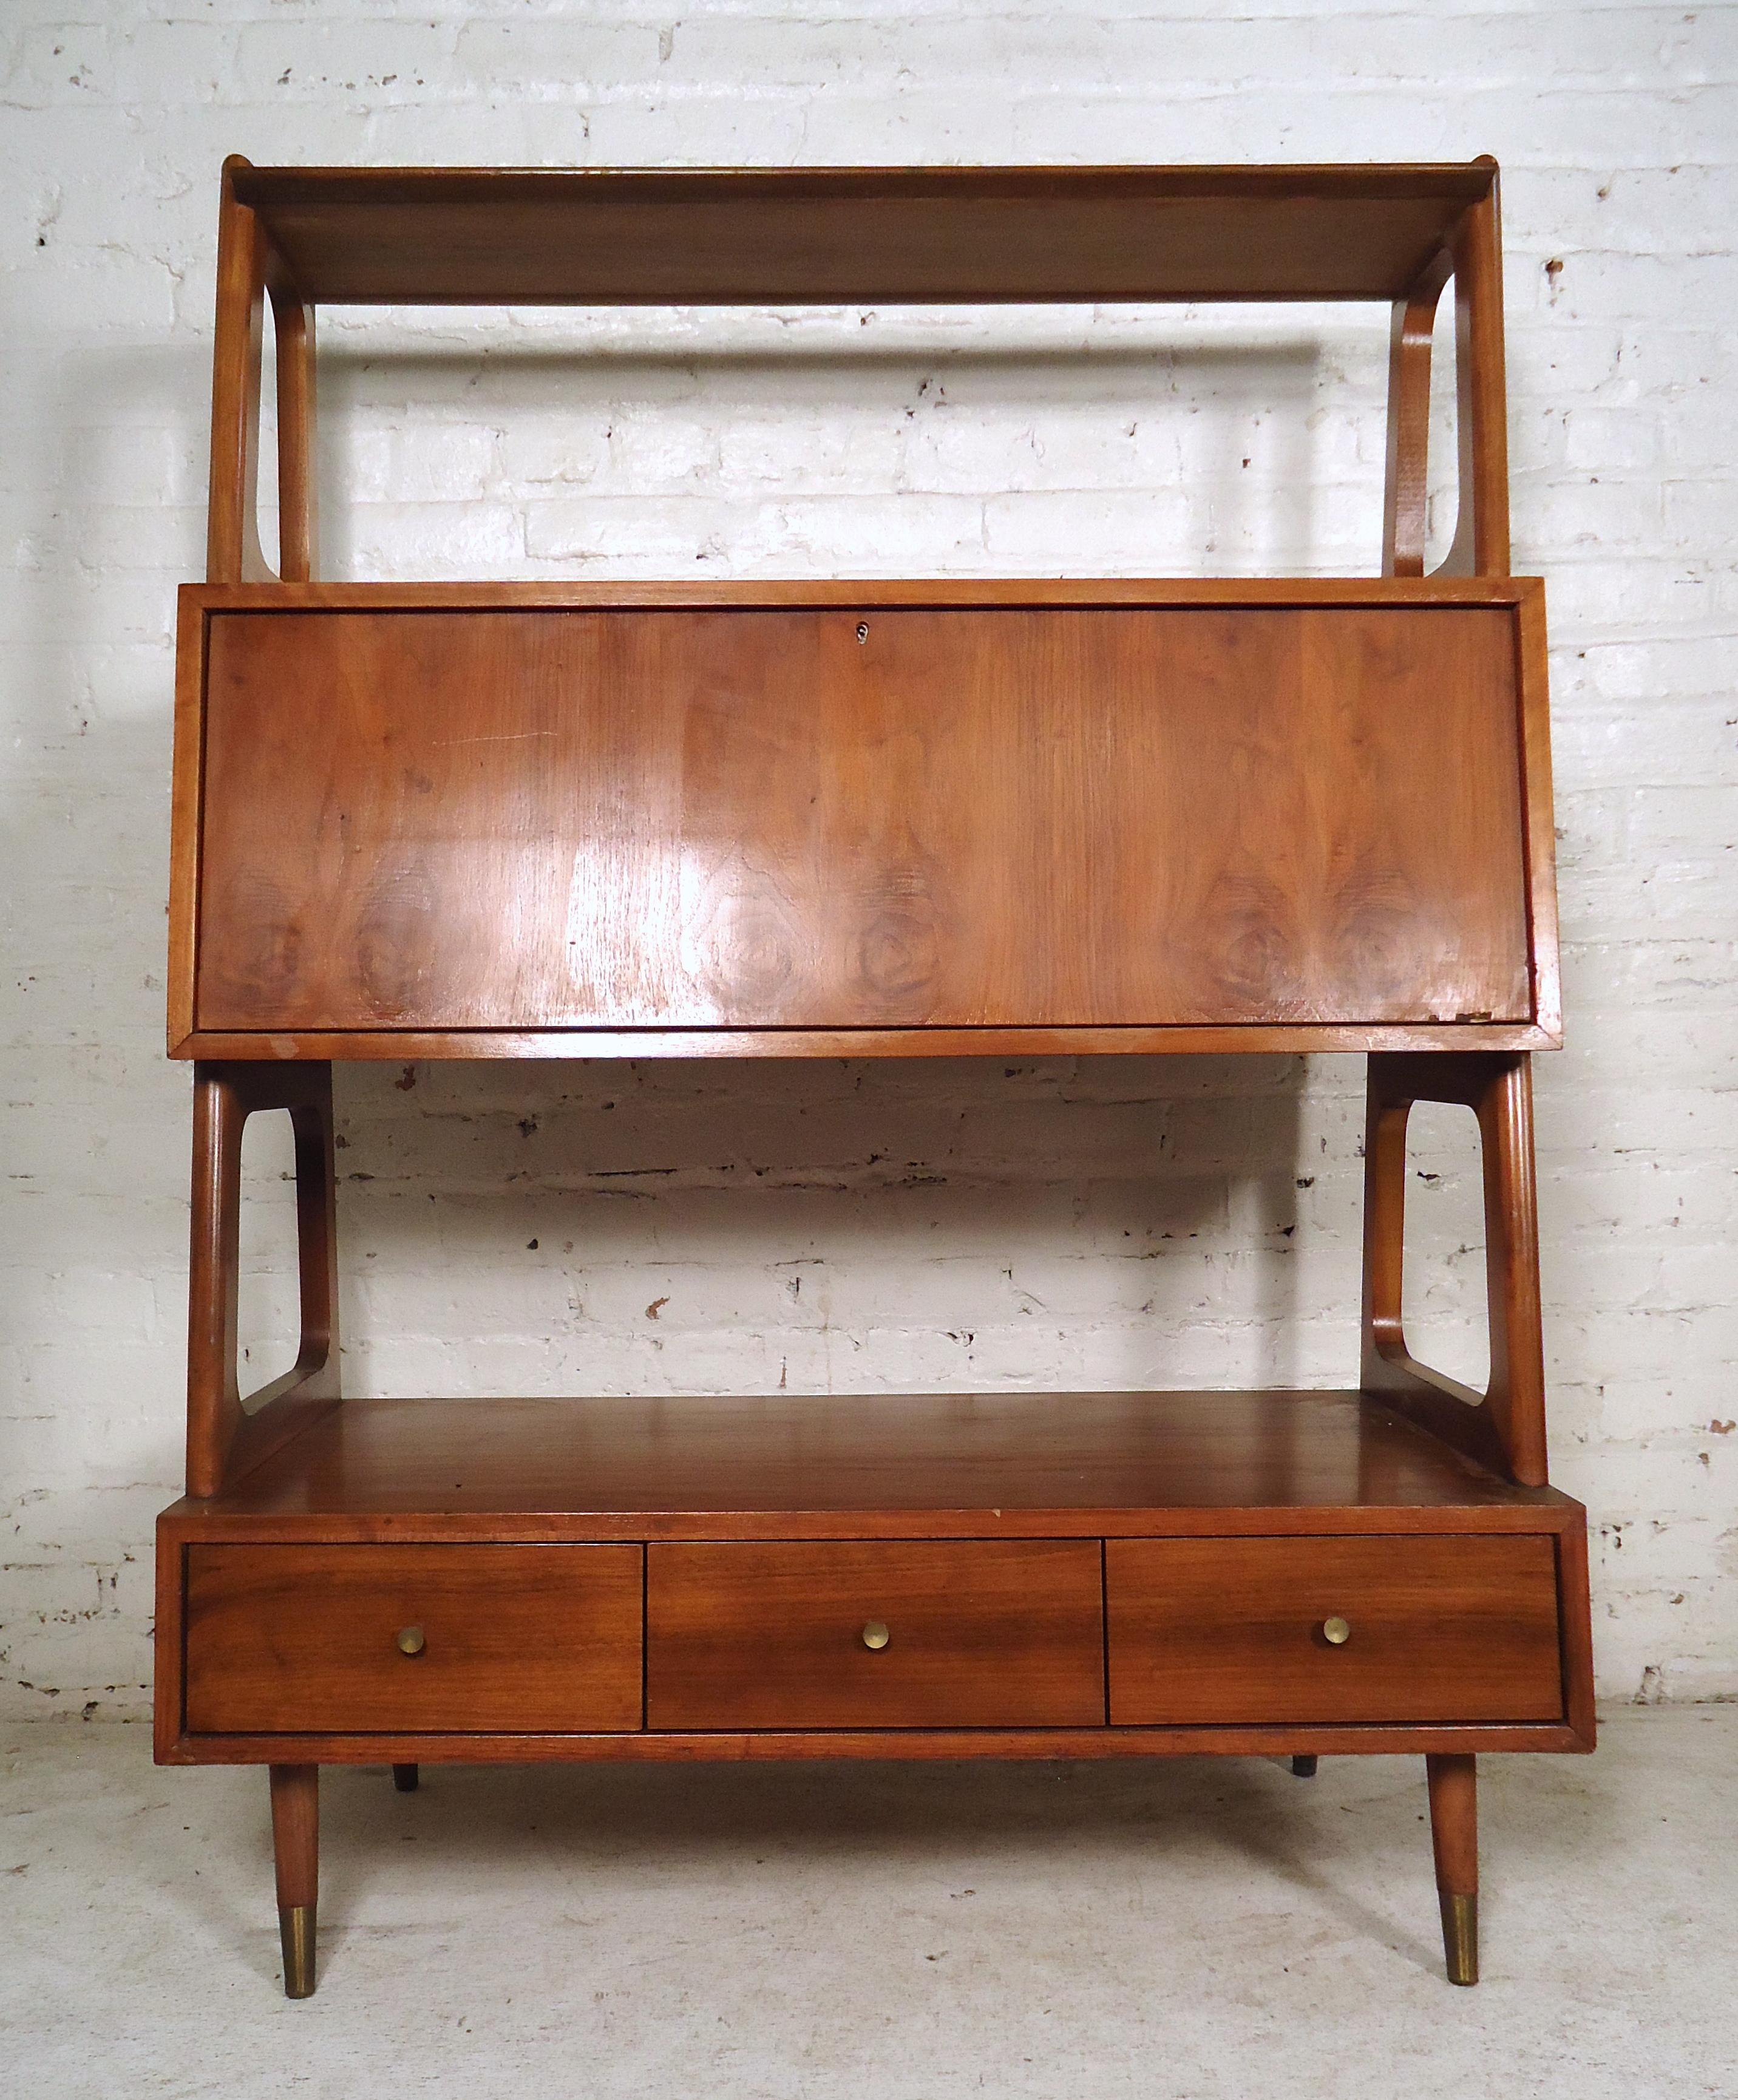 Unique vintage modern standing wall unit featuring a large storage compartment in the center, three spacious drawers at the bottom with brass pulls and sturdy splayed legs that keep this piece standing. 

(Please confirm item location - NY or NJ -